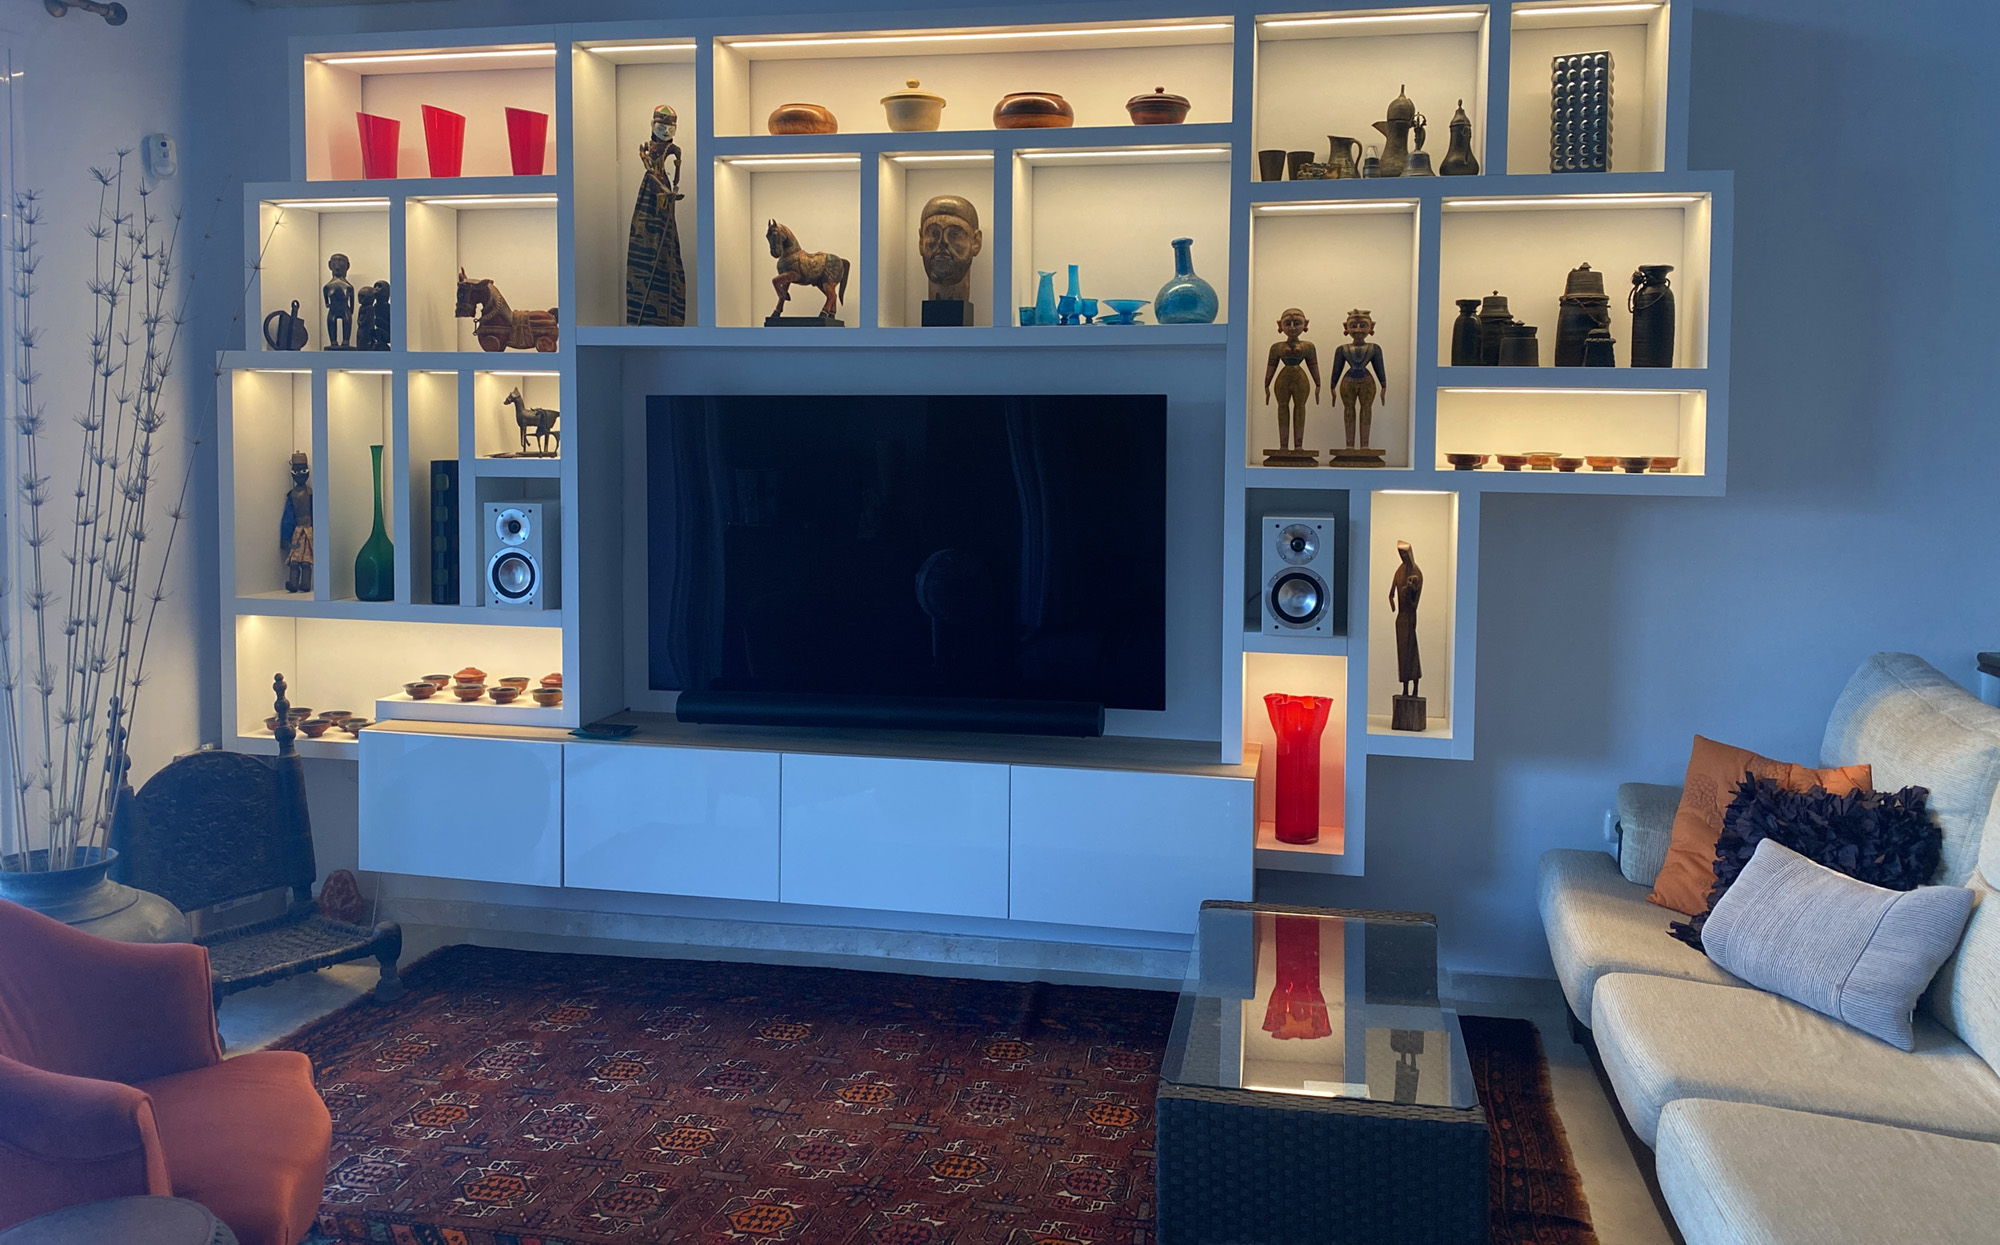 To showcase the sculptures and art, a custom-built shelving unit was designed by Christopher and Ann Jenkins and built by Christopher Jenkins and Michael Vogt.